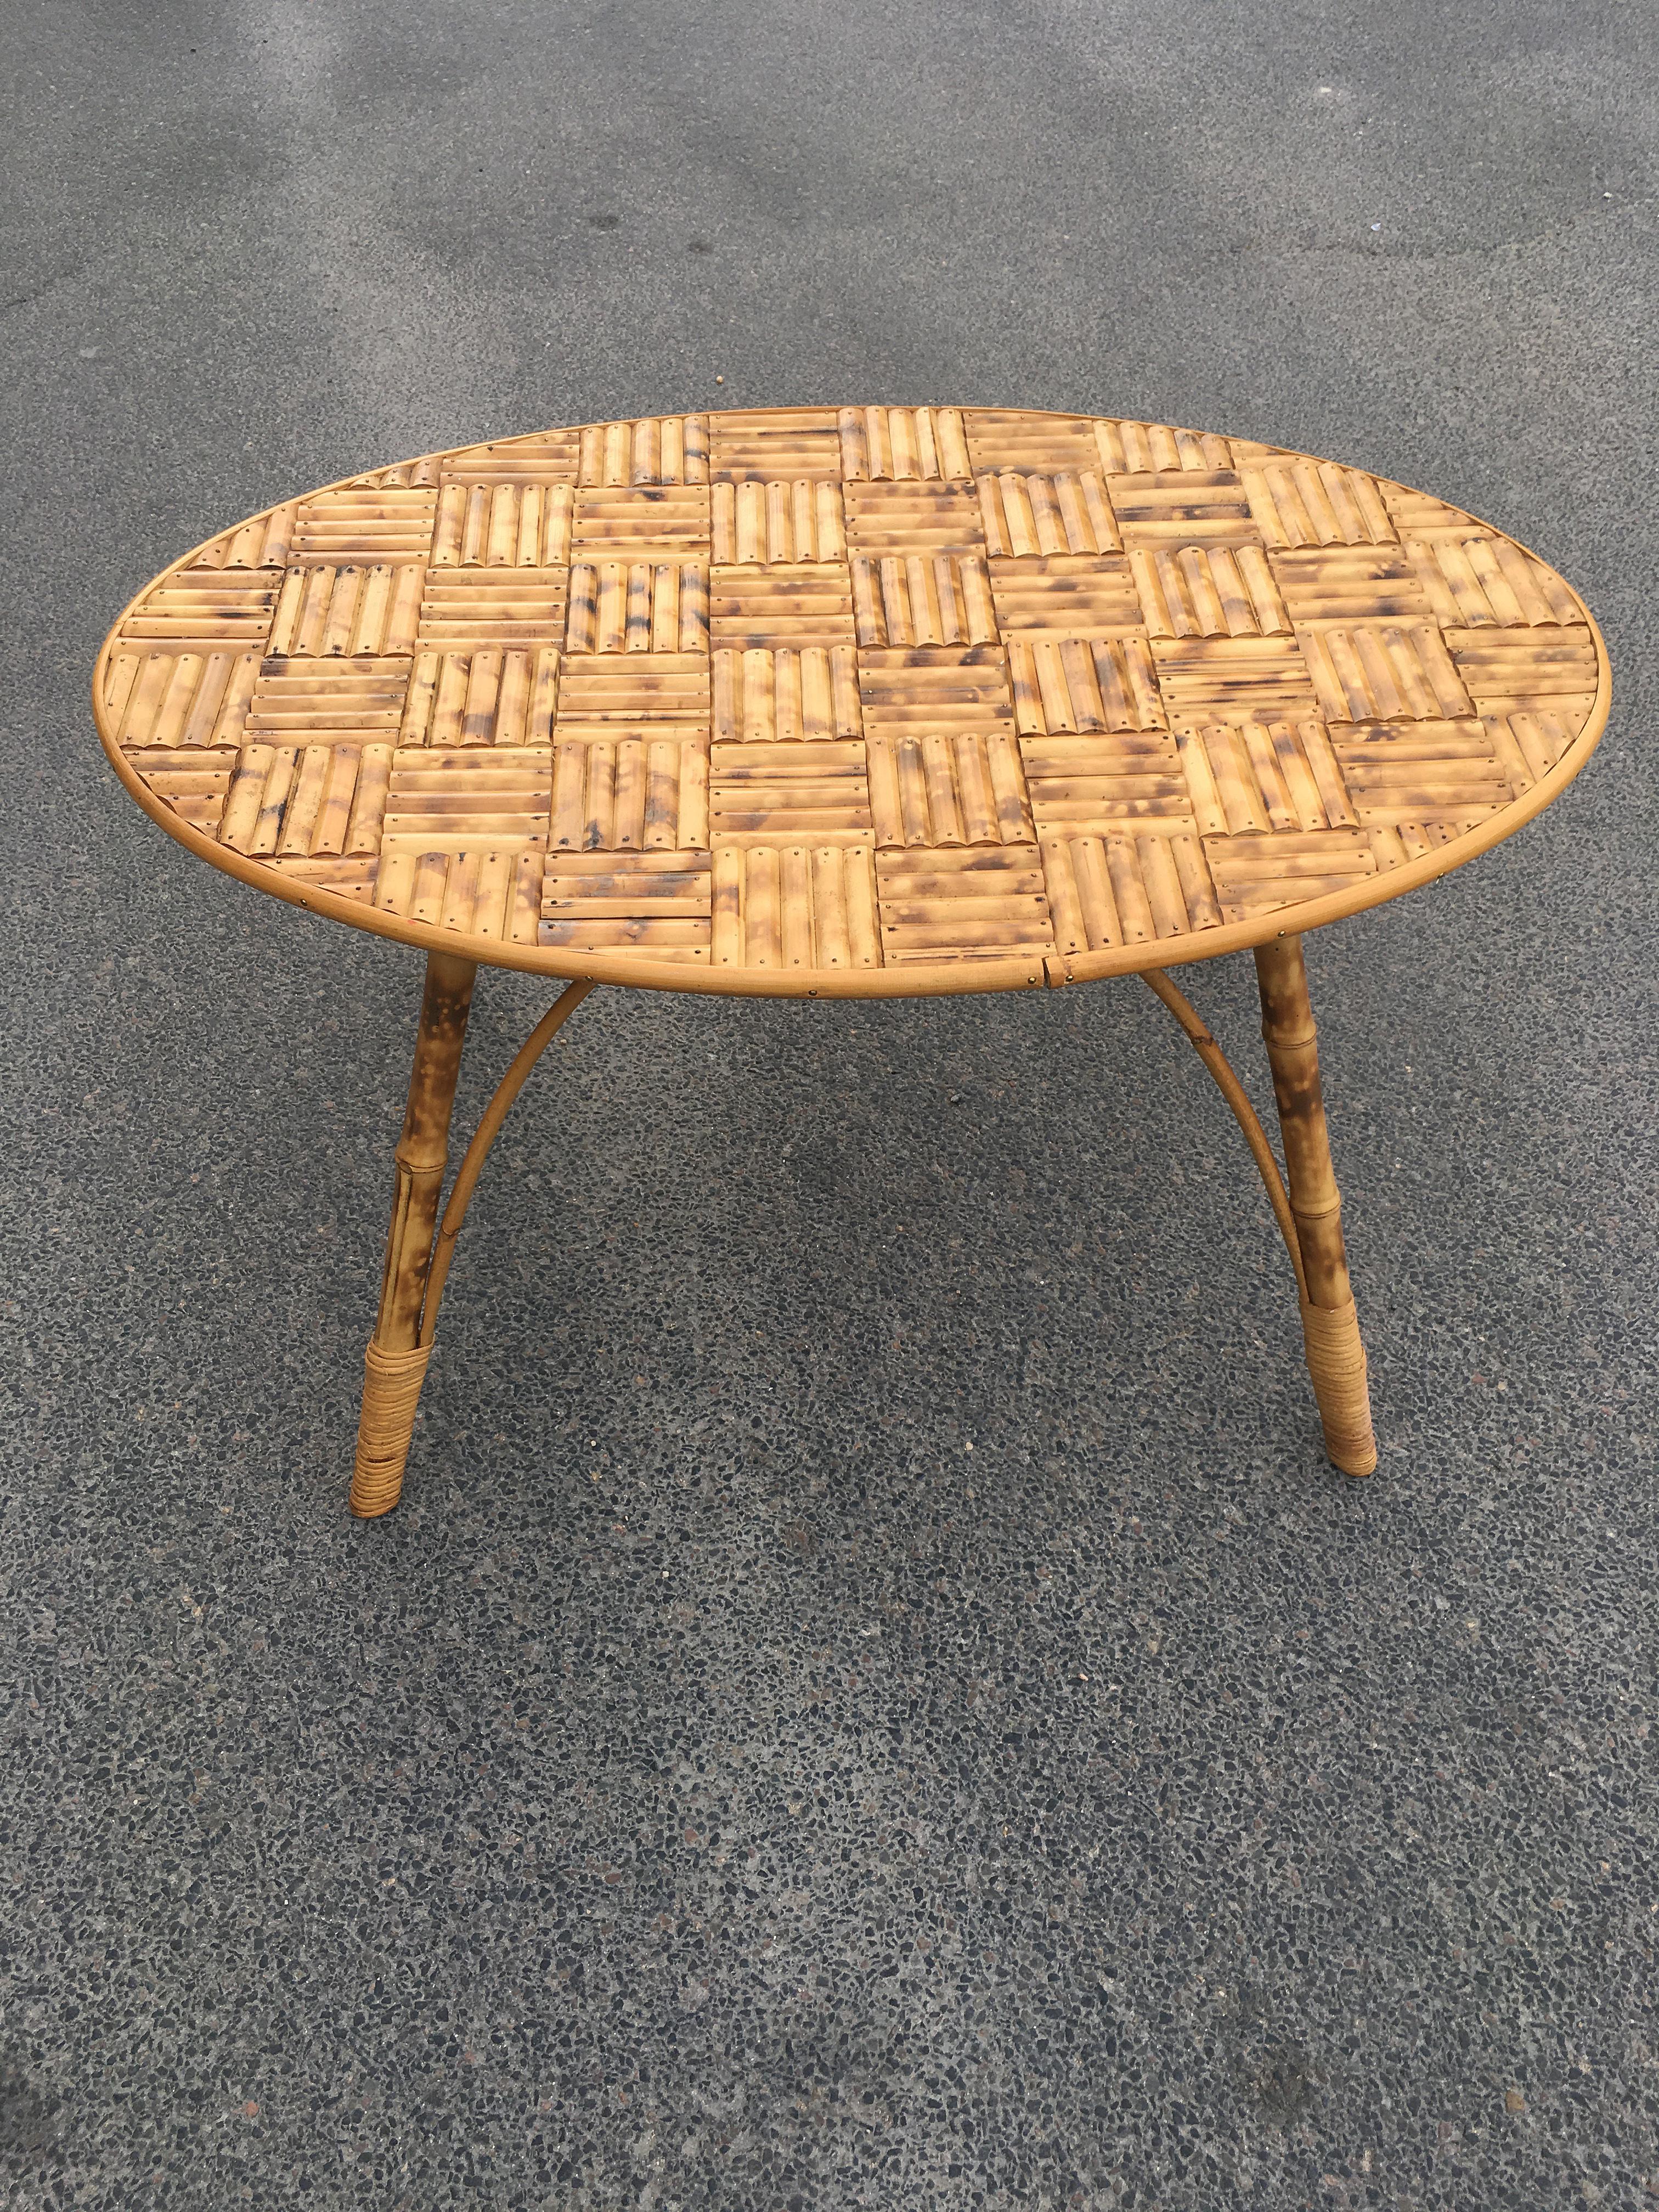 bamboo stick table